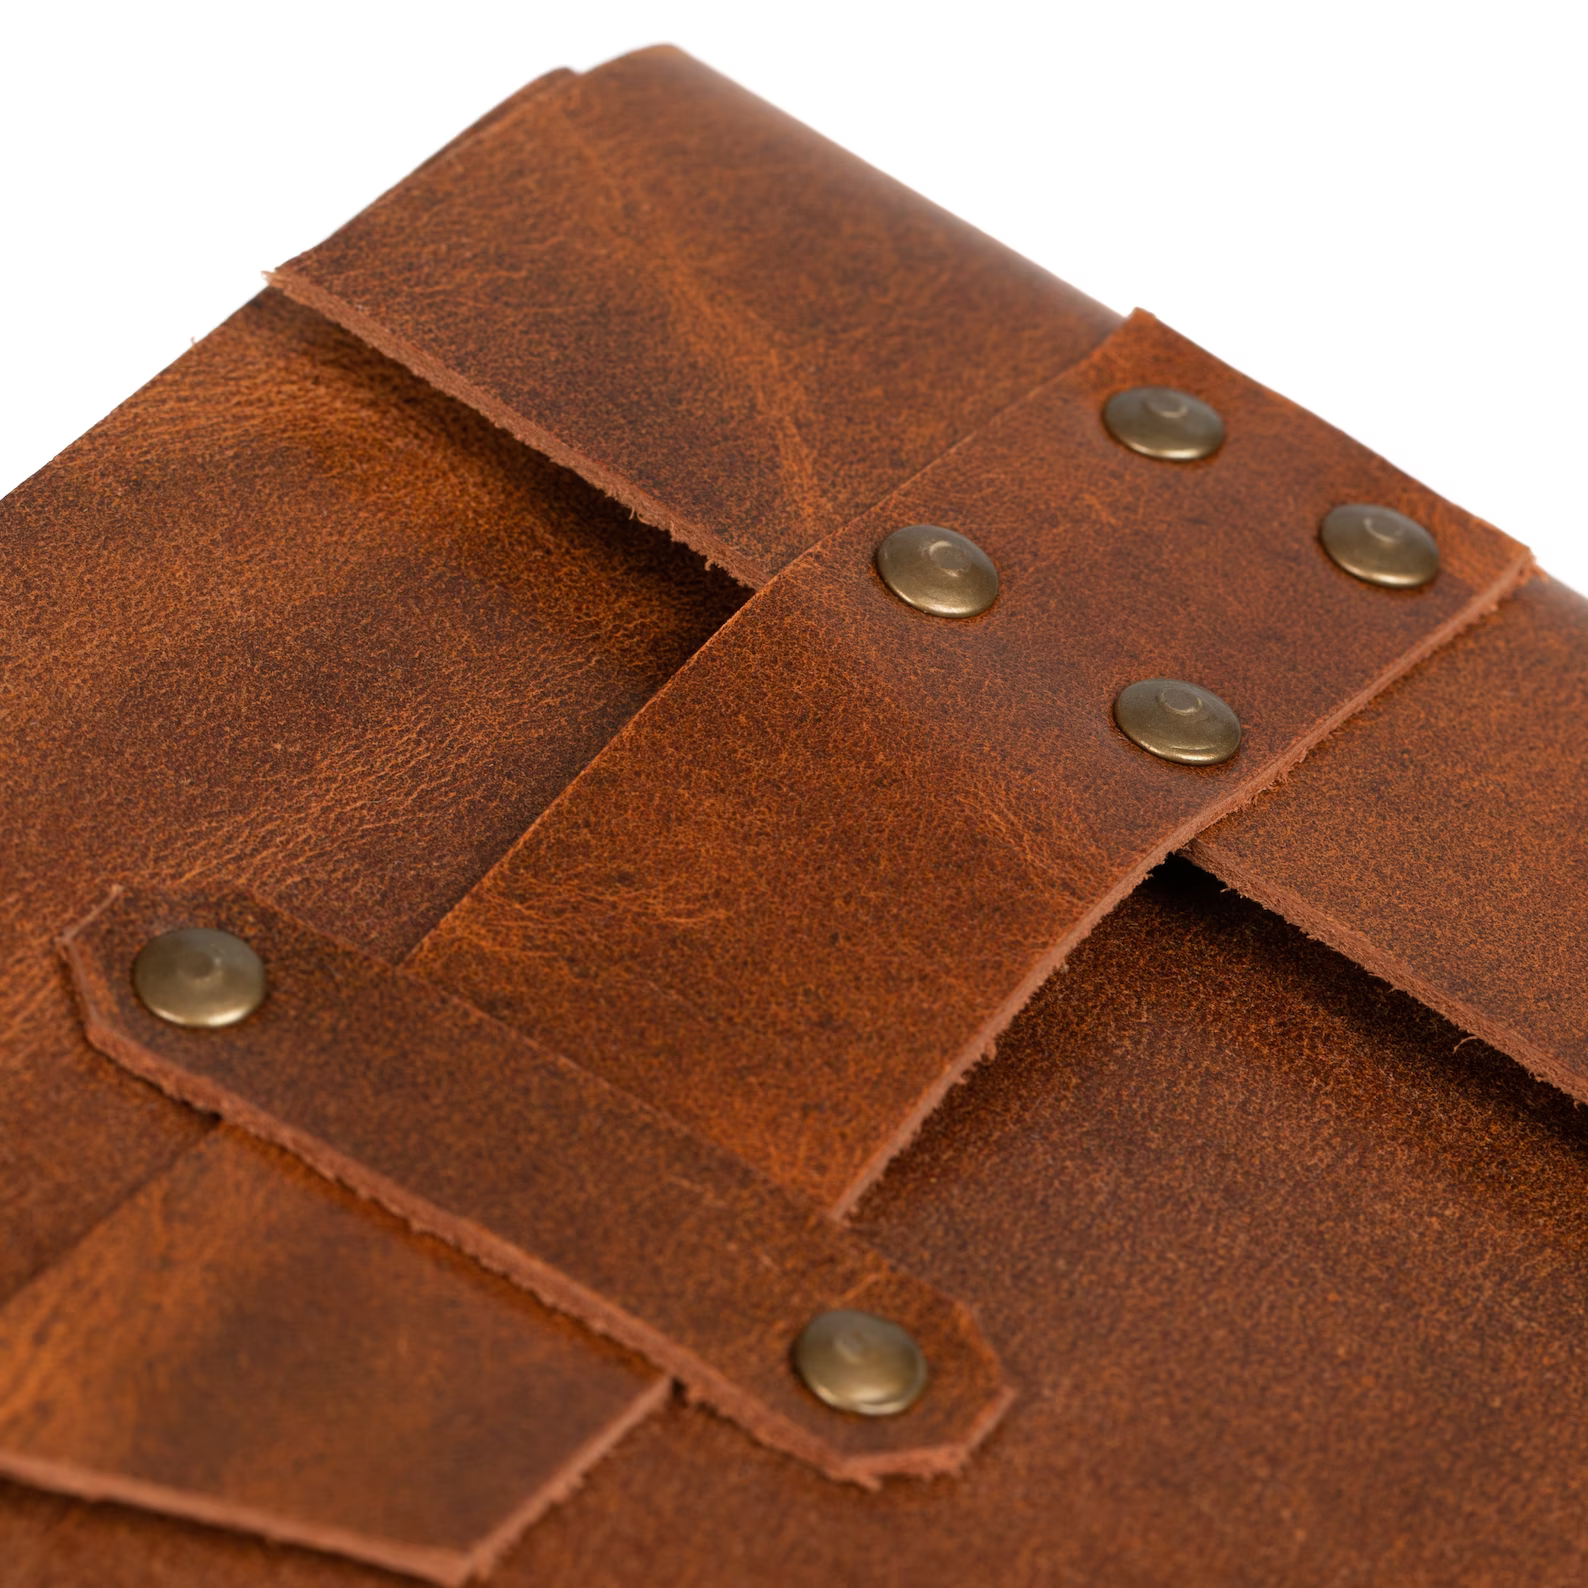 Leather Journal Notebook, Cotton Recycled Paper Travel Journal with Belt Cover